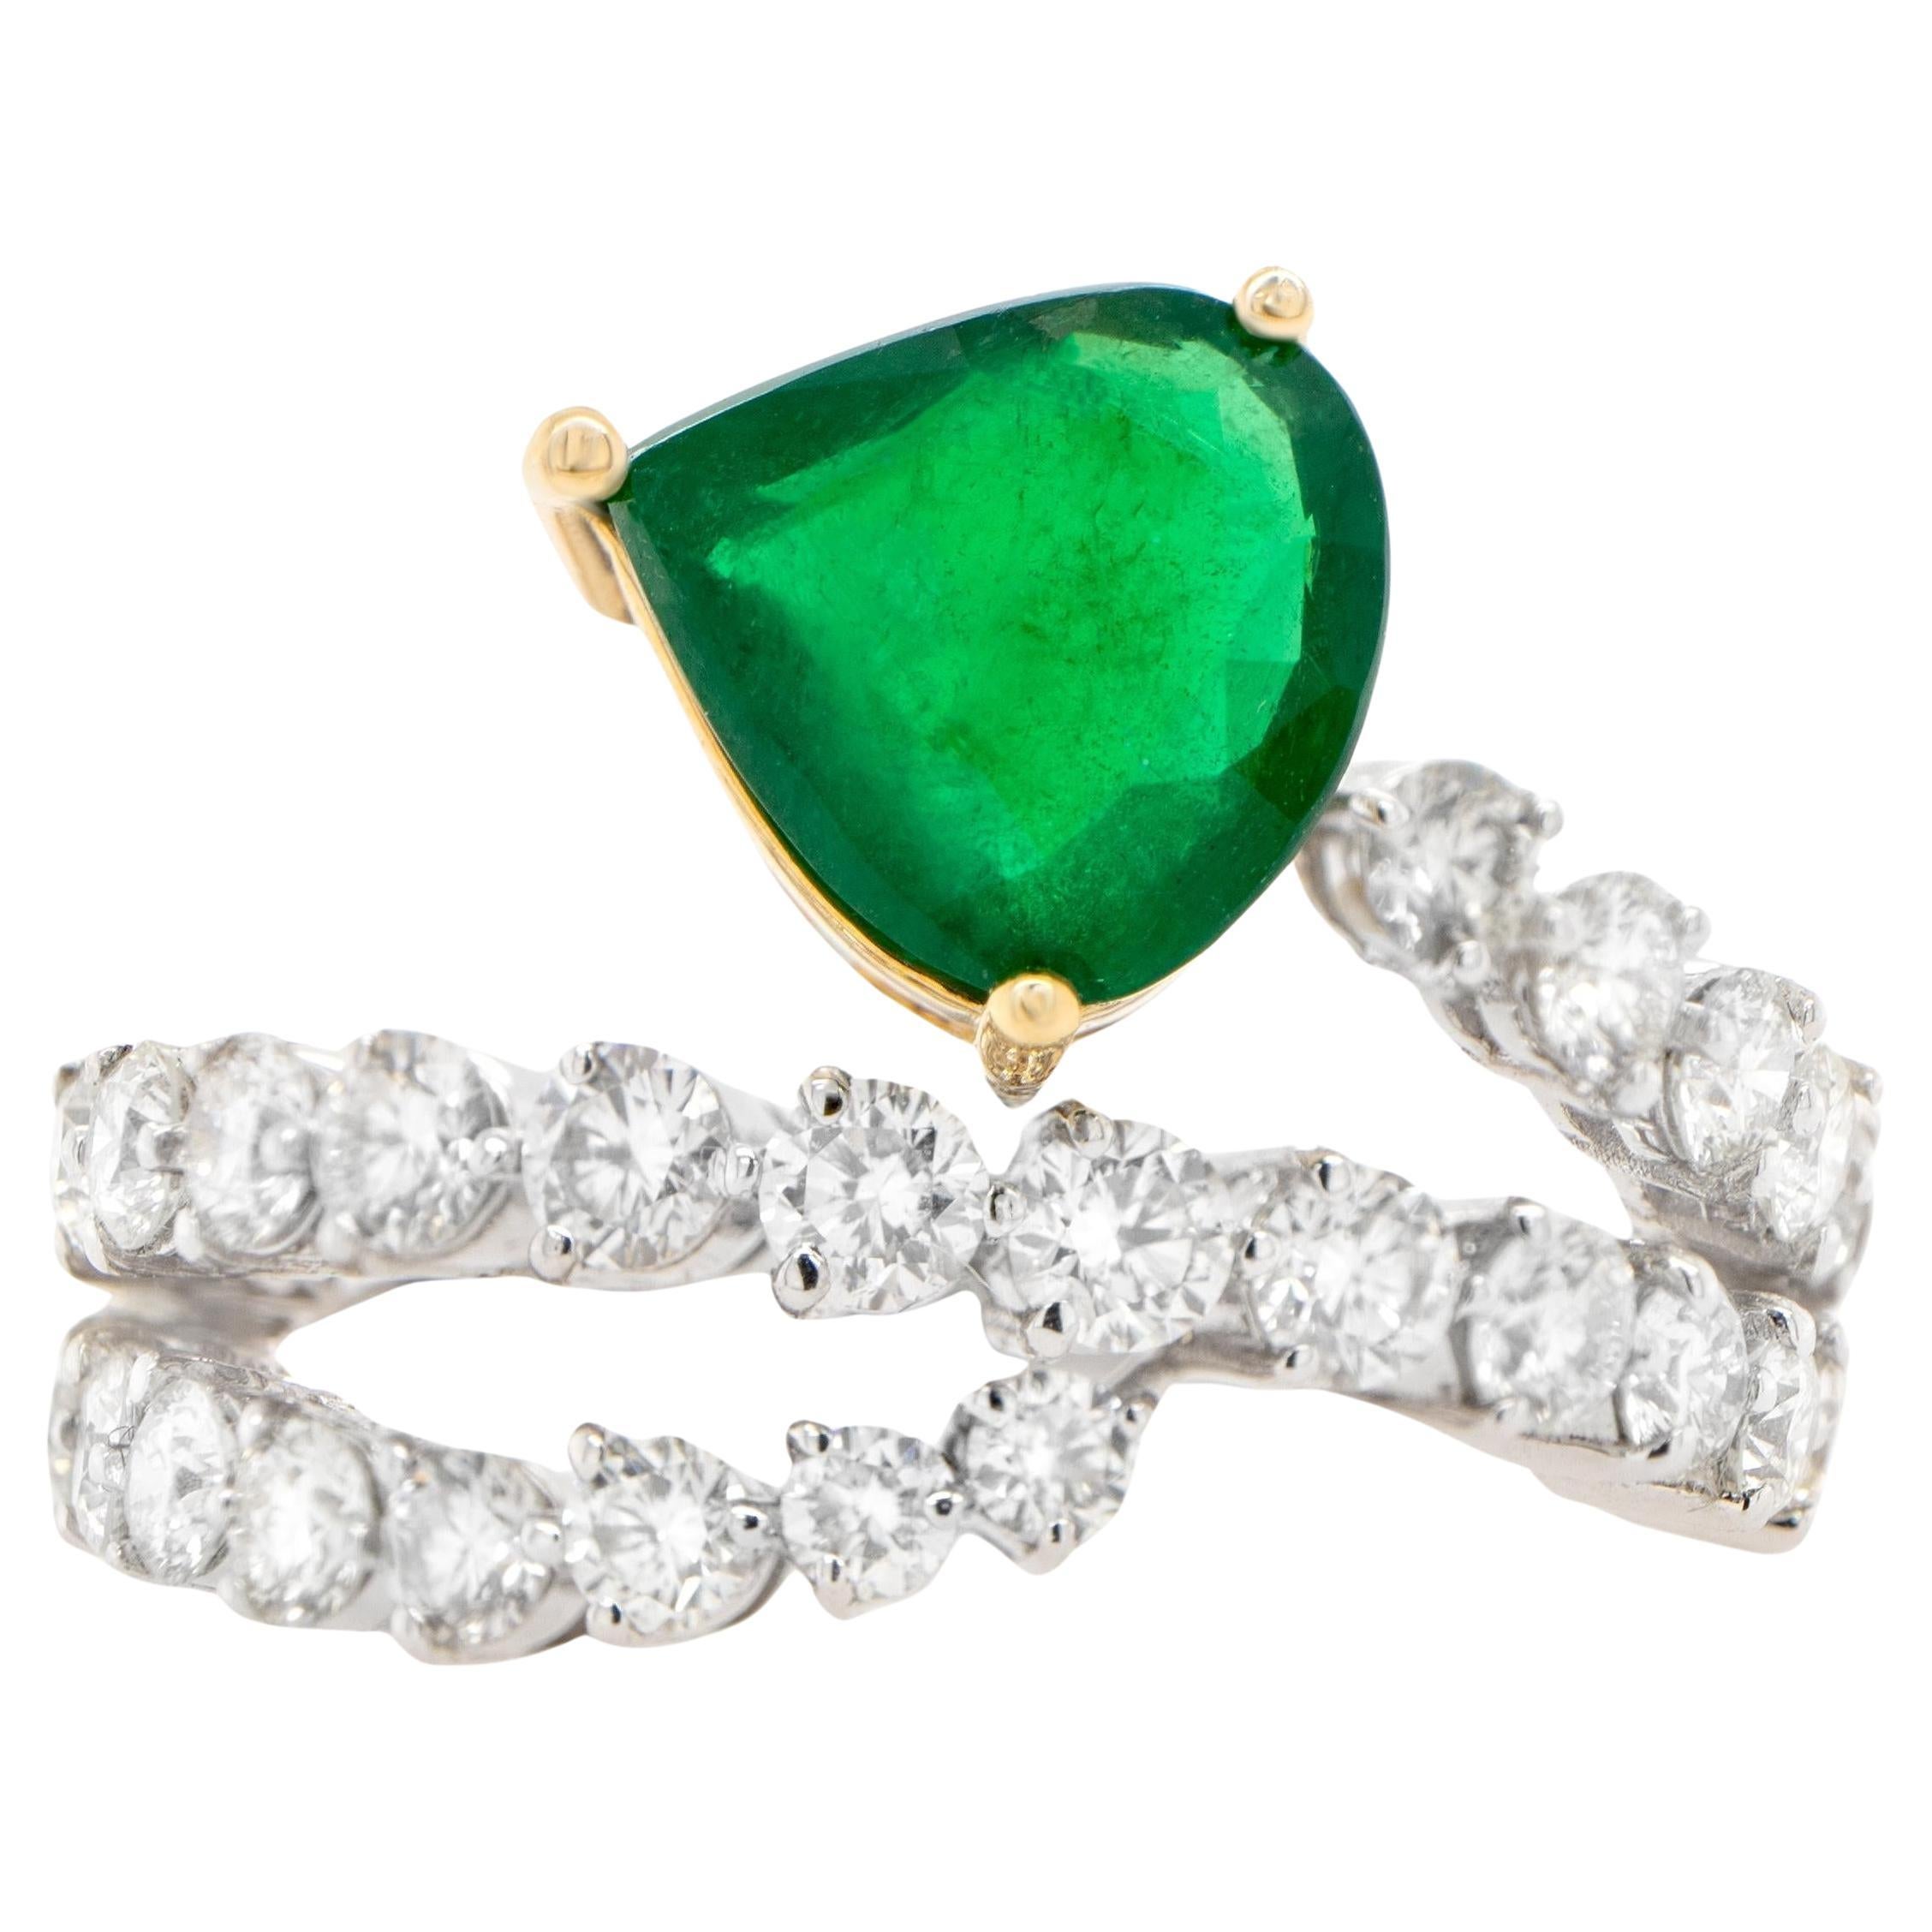 Emerald Serpent Ring With Diamonds 3.41 Carats 18K Gold